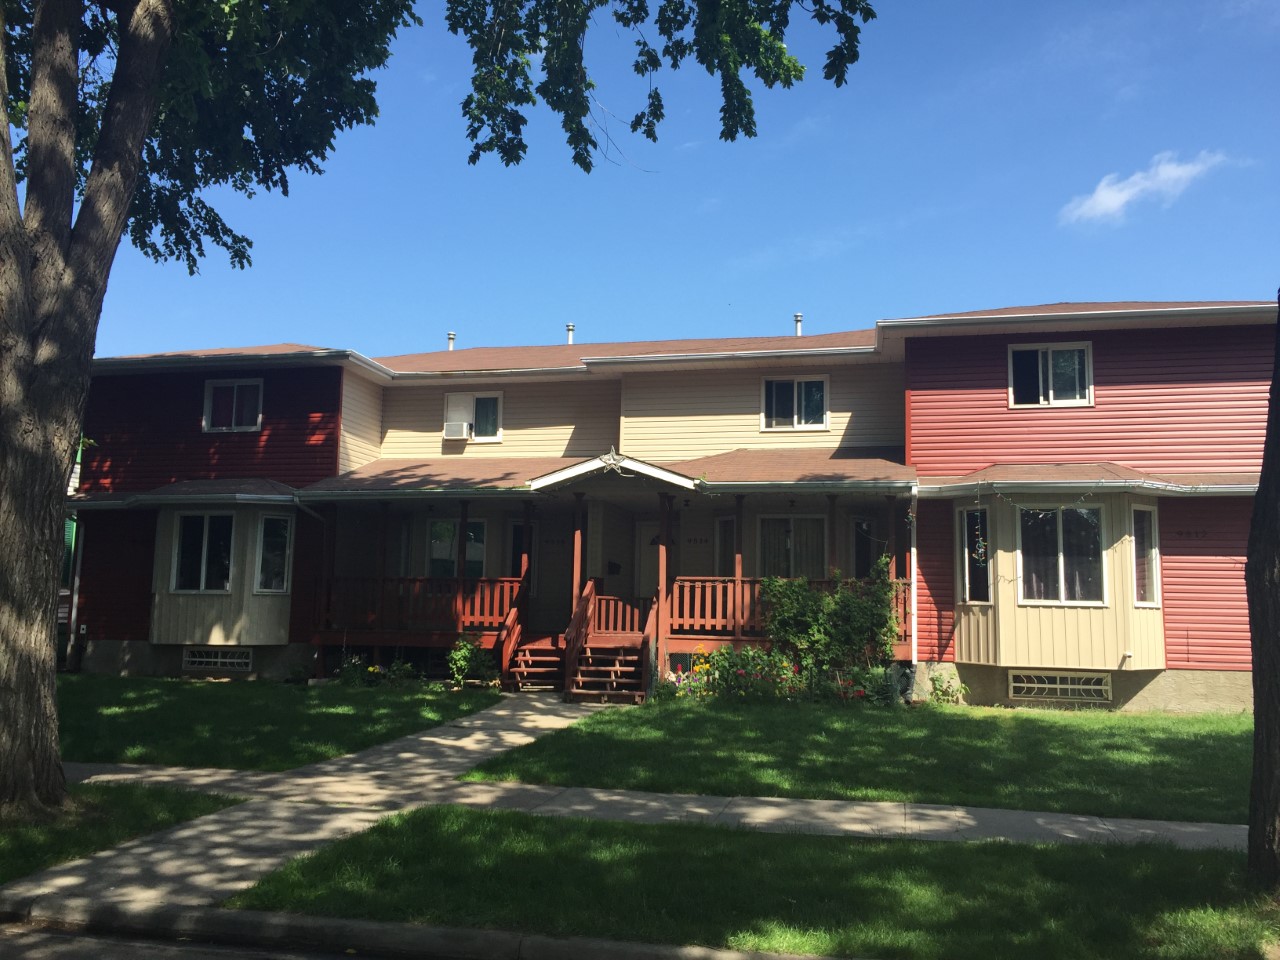 Siding Reno to Make Affordable Housing Aesthetically Pleasing